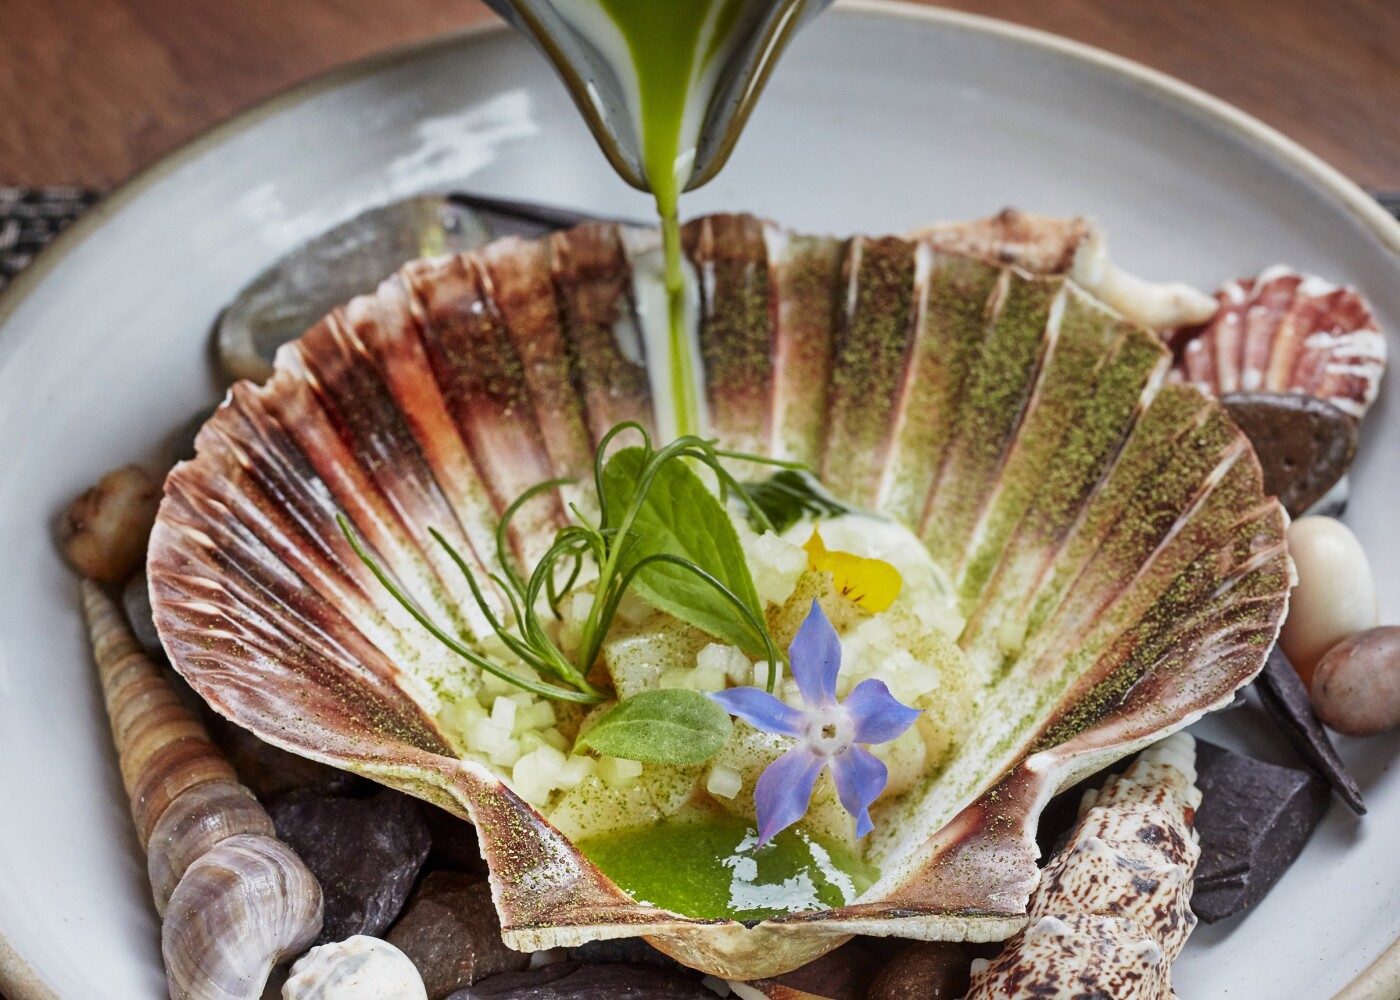 Such a lovely dish from Chef Luke Tipping from Michelin starred Simpsons Restaurant, Birmingham England. Lovely scallop dish with flowers and shells (though I don't think eating the shells is recommended.<br />
<br />
Chef: Luke Tipping @luketipping_ Twitter: @LukeTipping1<br />
Restaurant: Simpsons, Birmingham -IG: @simpsons_restaurant Website: www.simpsonsrestaurant.co.uk<br />
Photographer: @jodihindsphoto www.jodihinds.com